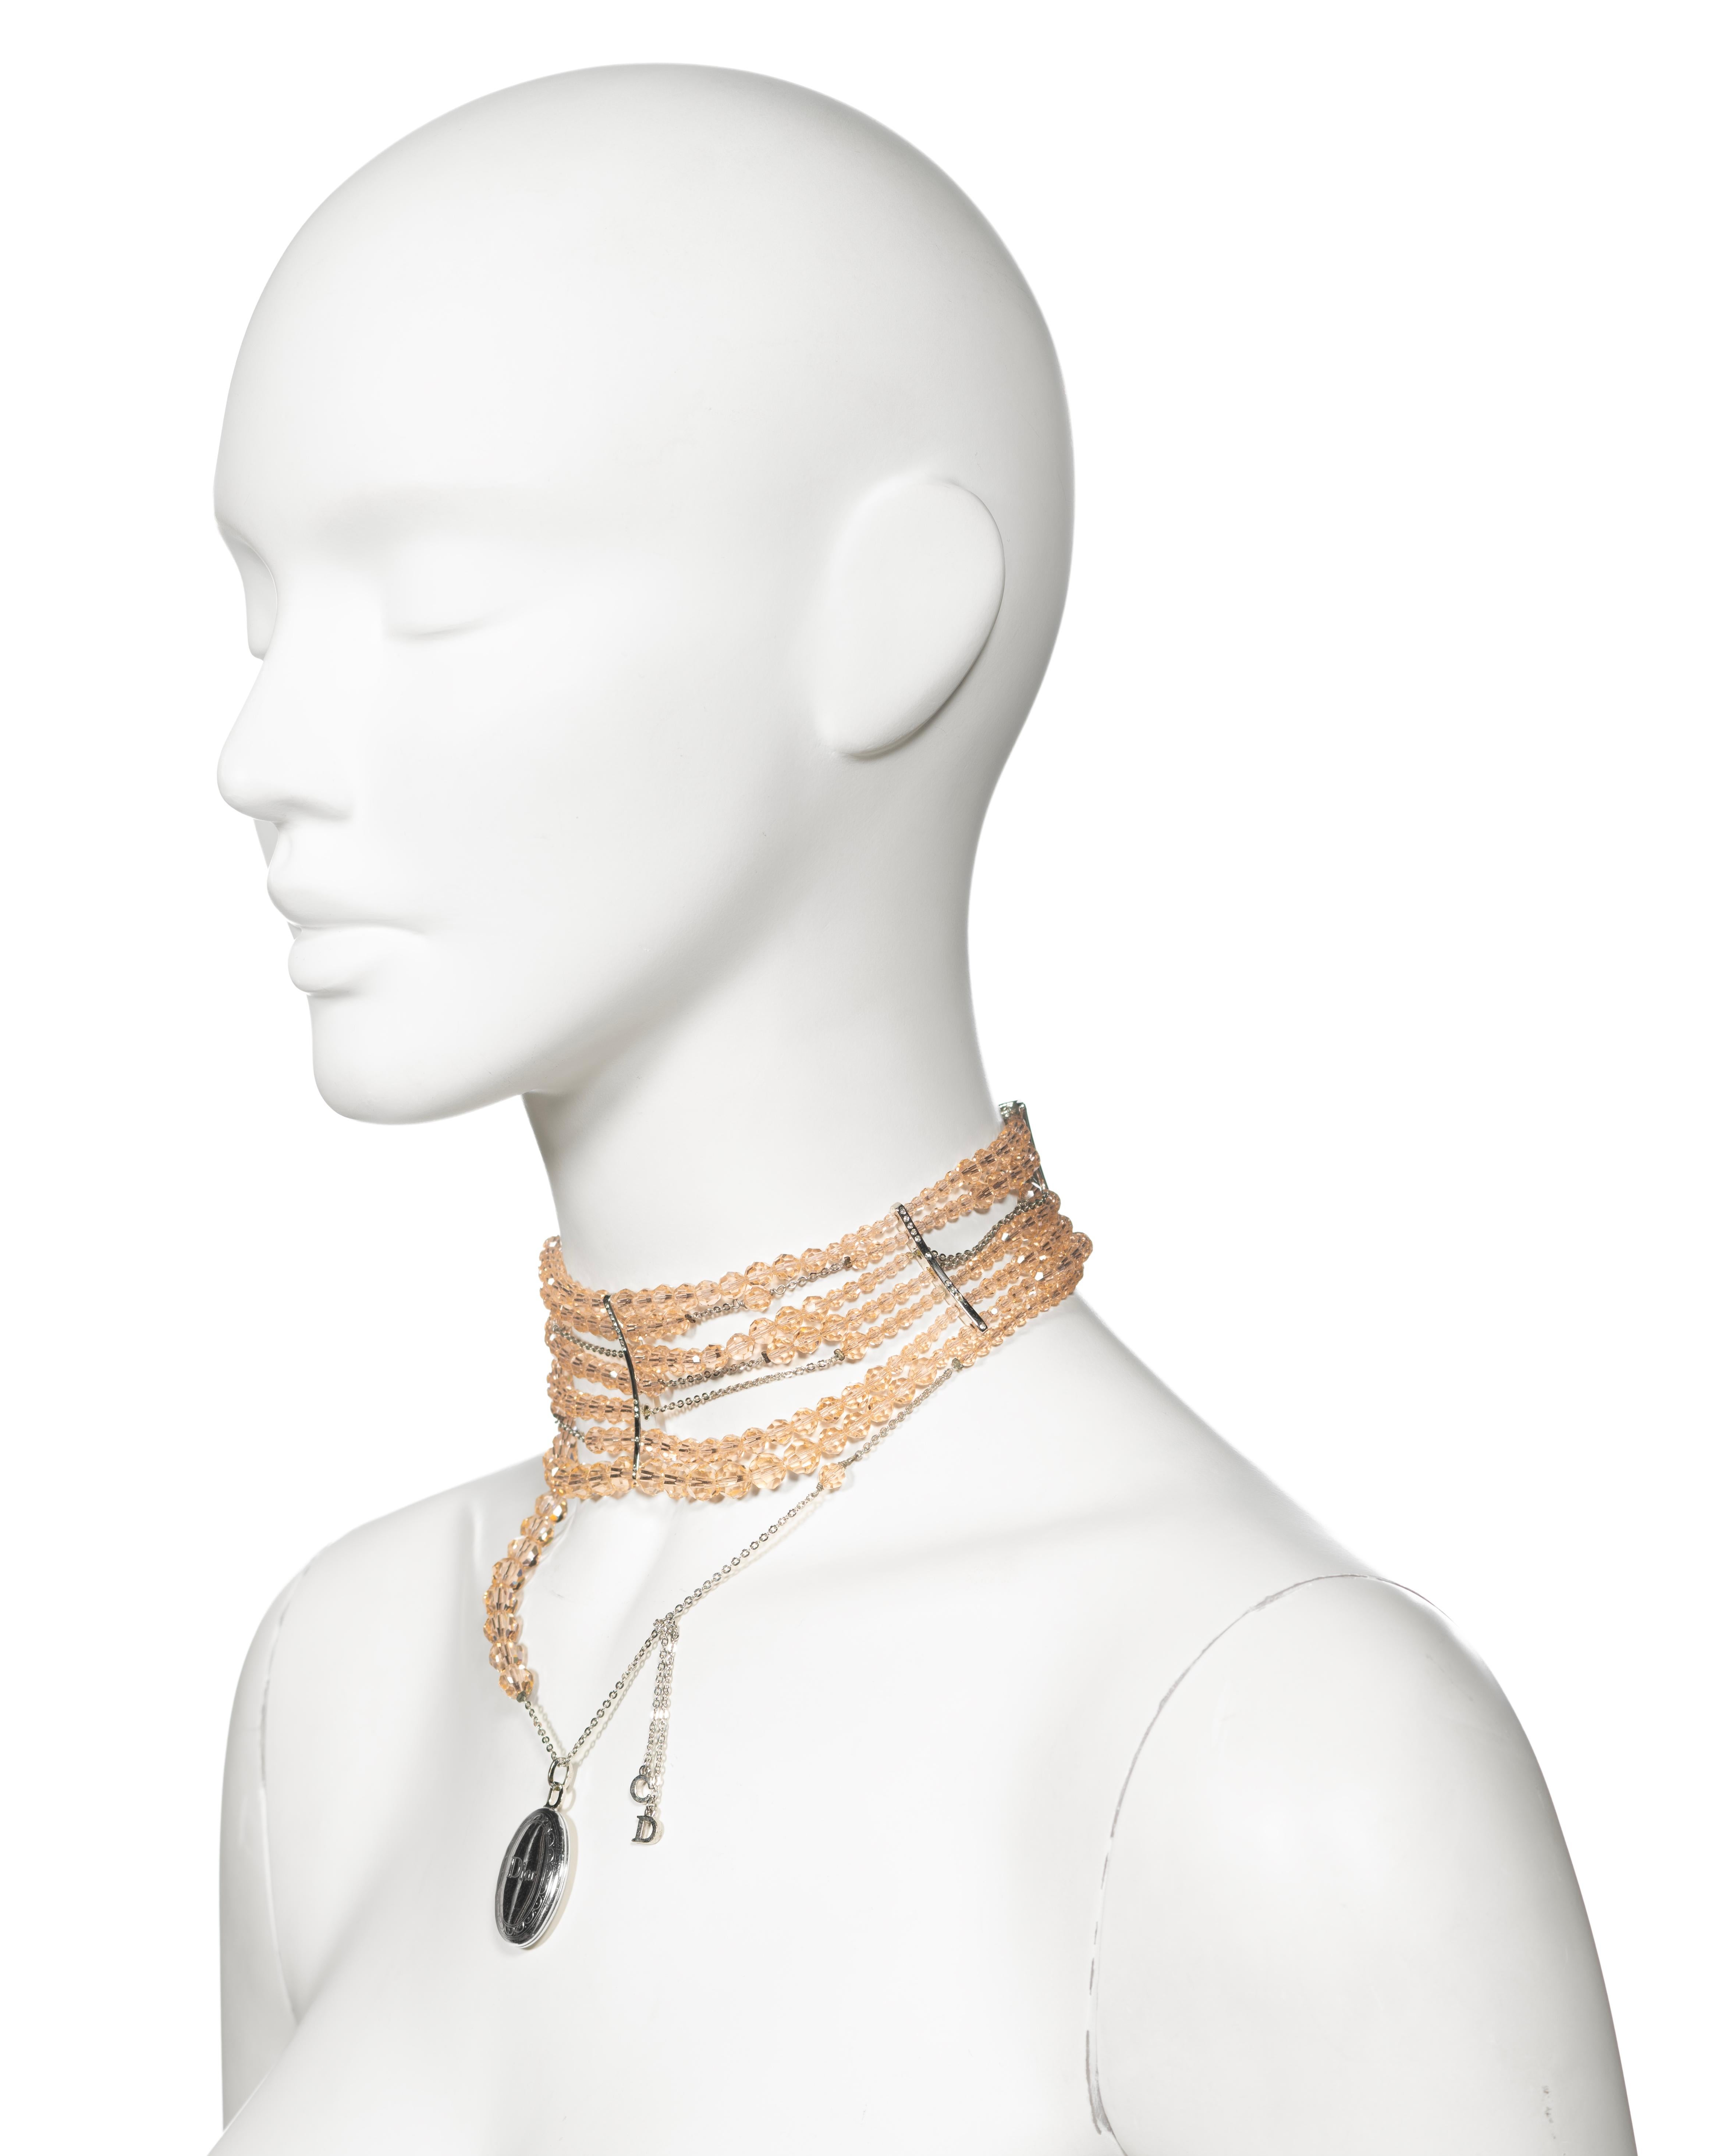 Christian Dior by John Galliano Distressed Peach Bead Choker Necklace, c. 2004 For Sale 5